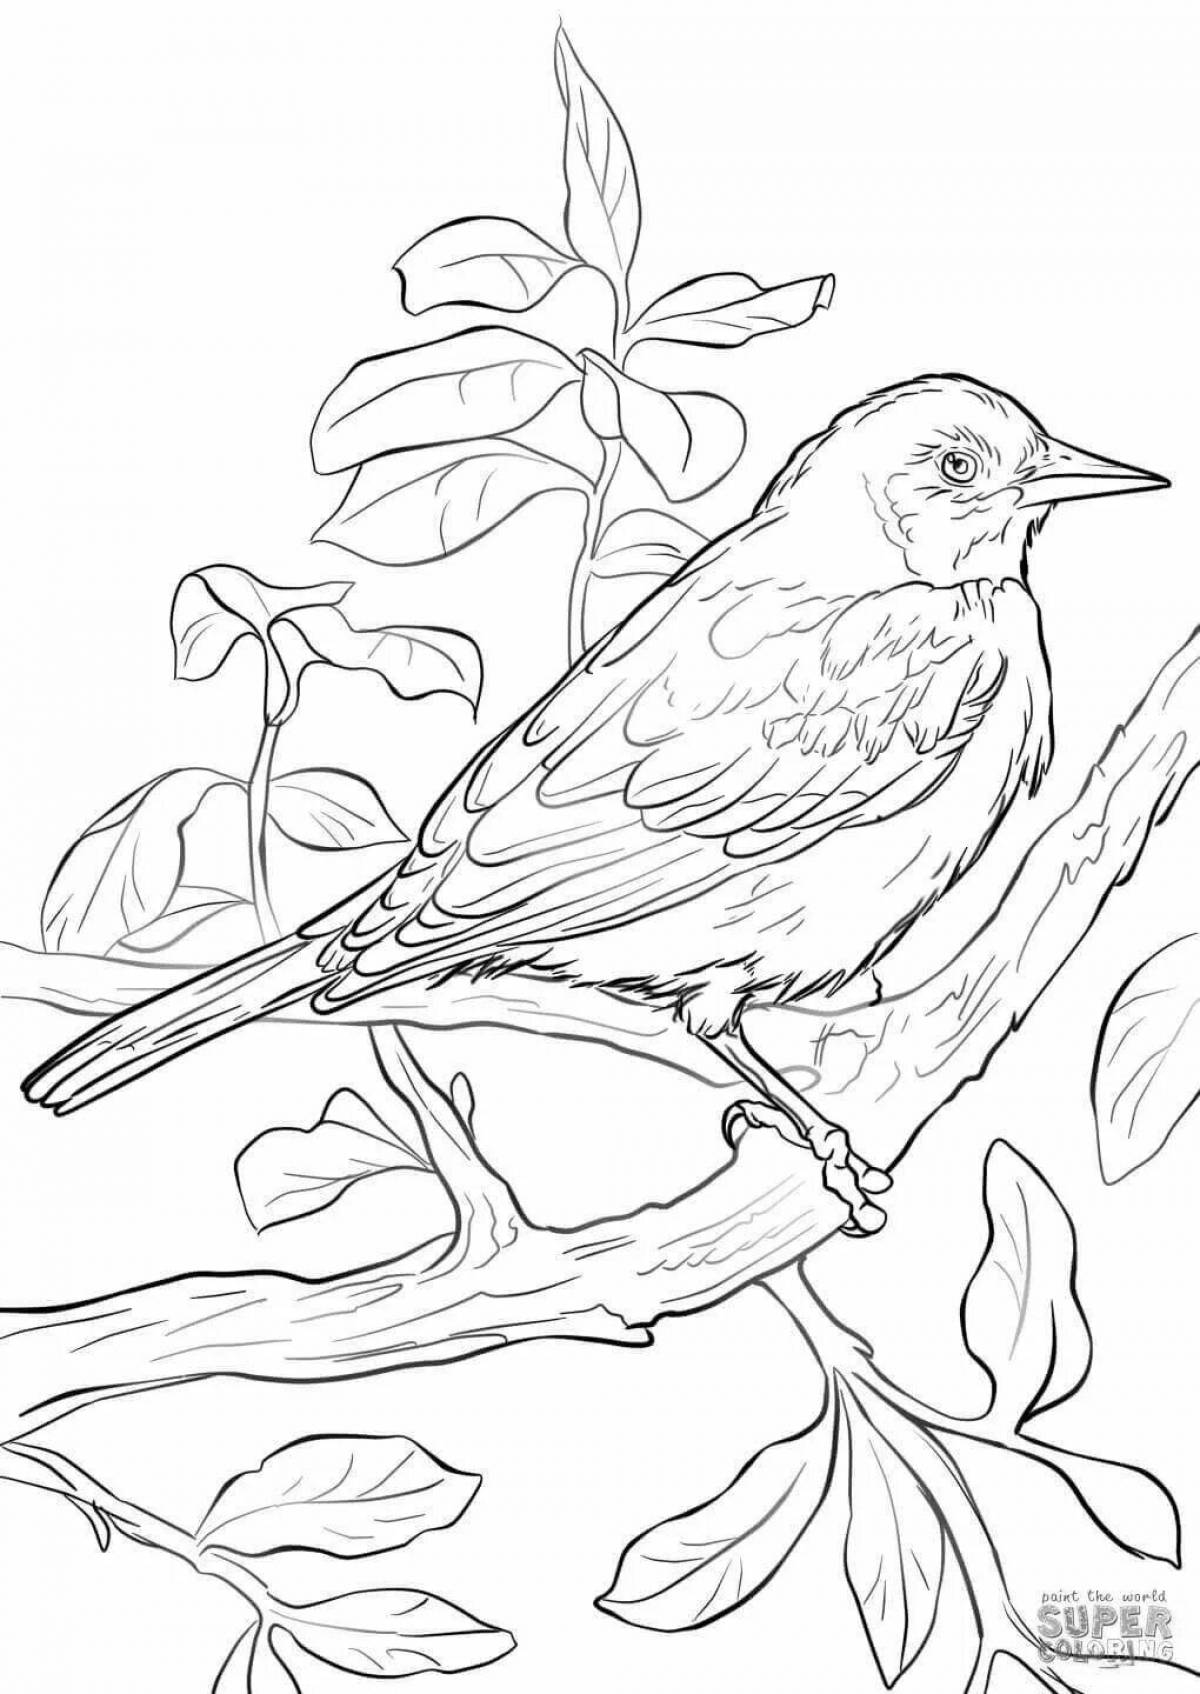 Shiny nightingale coloring book for kids